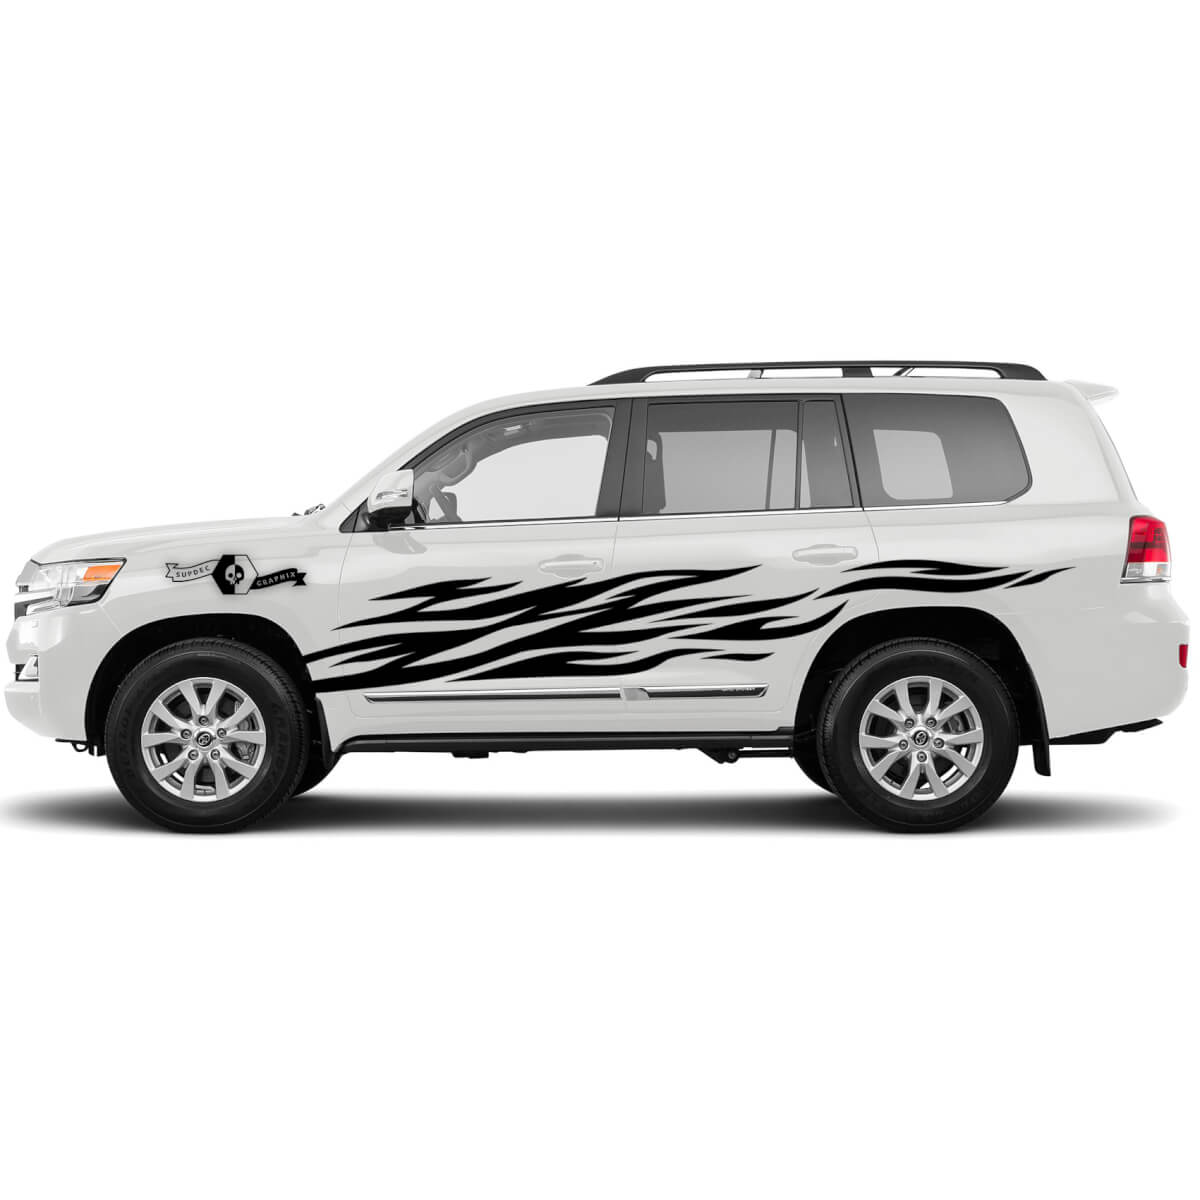 Abstract Lines Decal Sticker for off road Side Toyota land Cruiser logo J300 J200